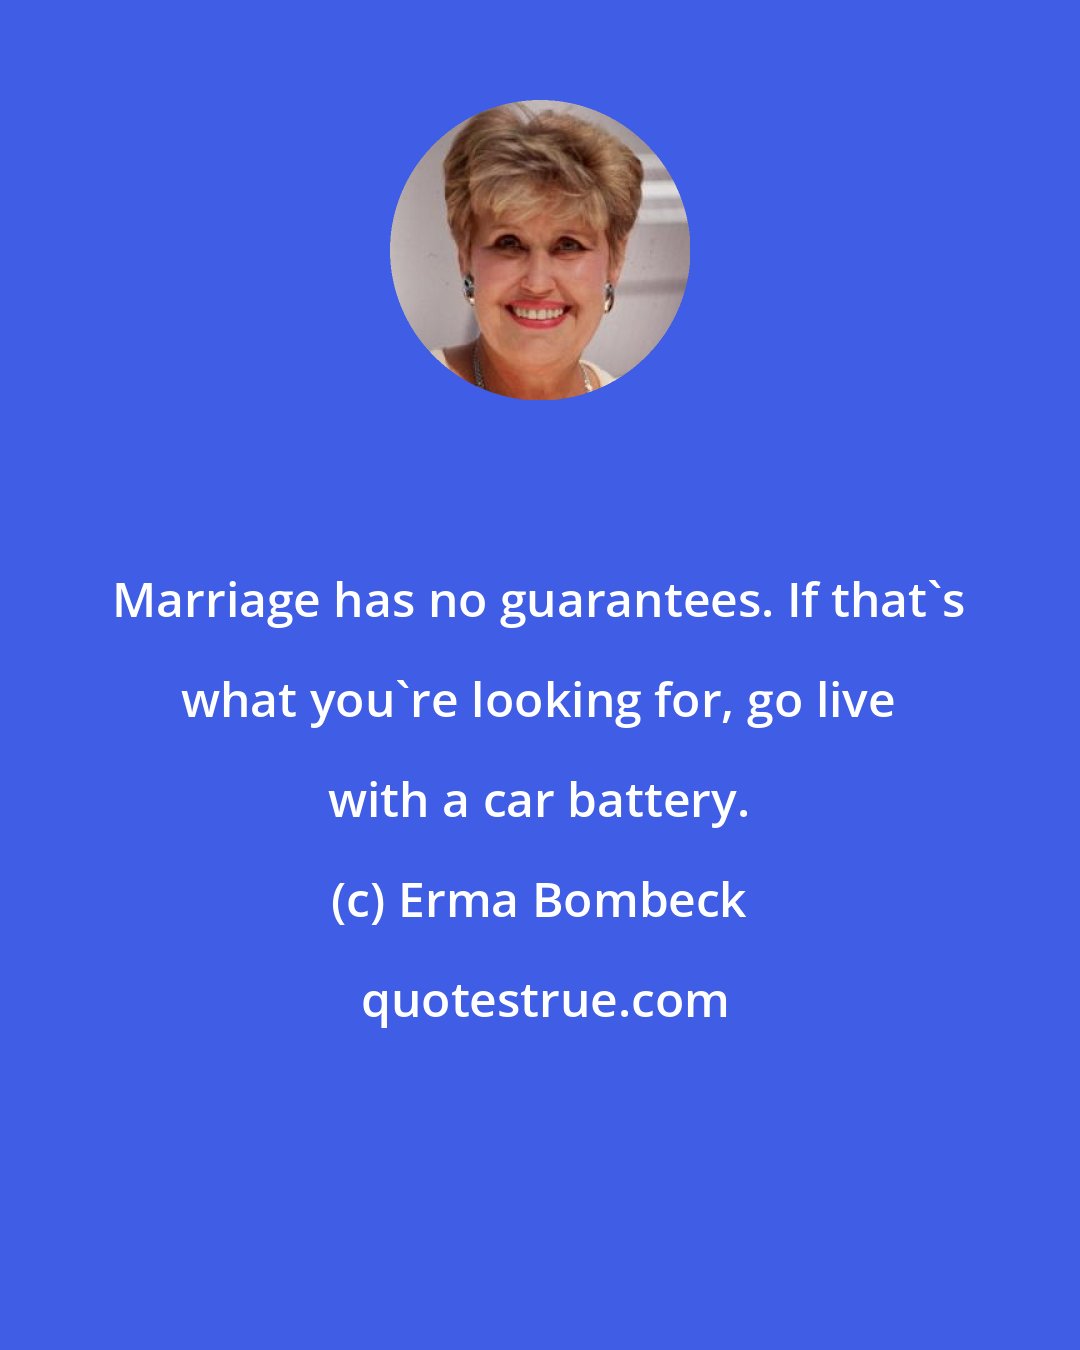 Erma Bombeck: Marriage has no guarantees. If that's what you're looking for, go live with a car battery.